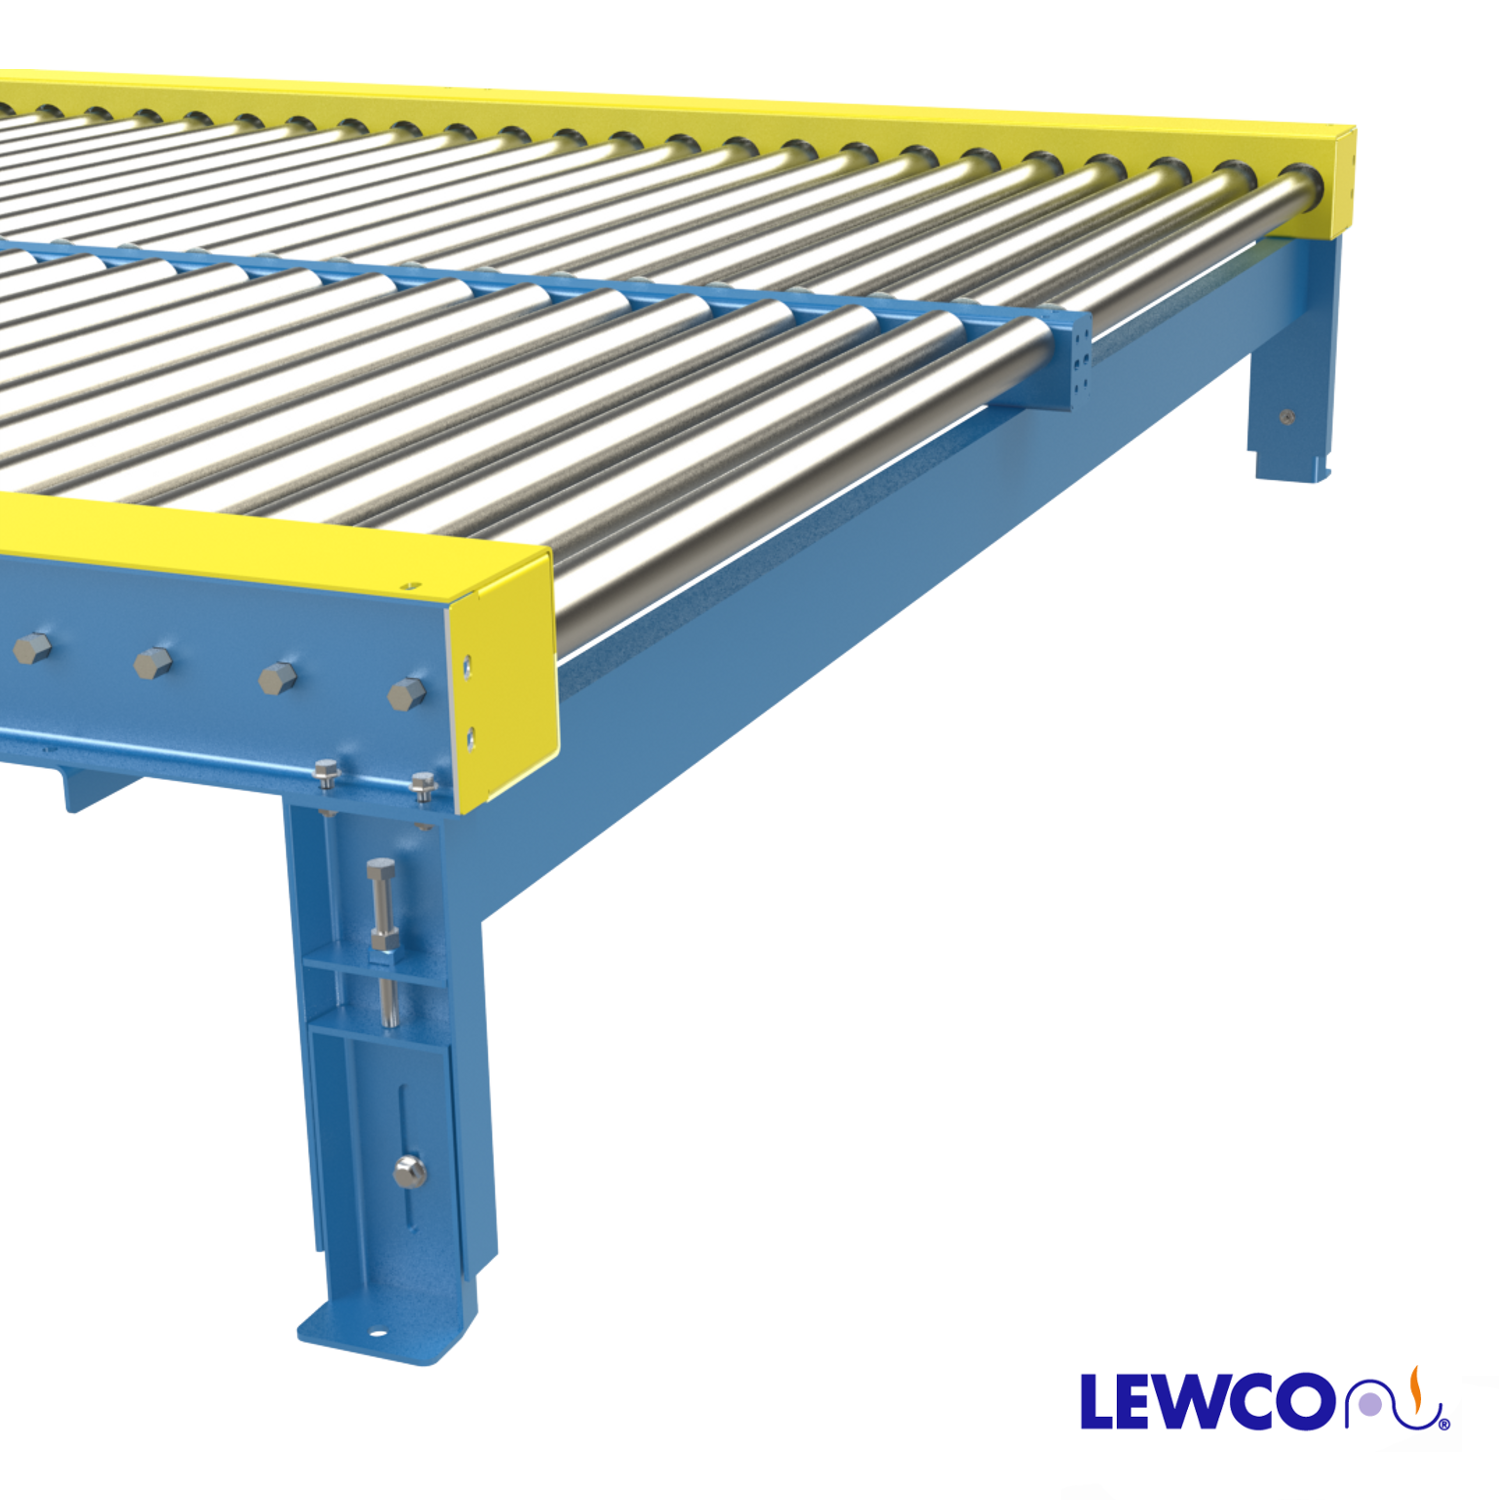 Chain Driven Live Roller Conveyor with Dual Lane Support – Lewco Conveyors